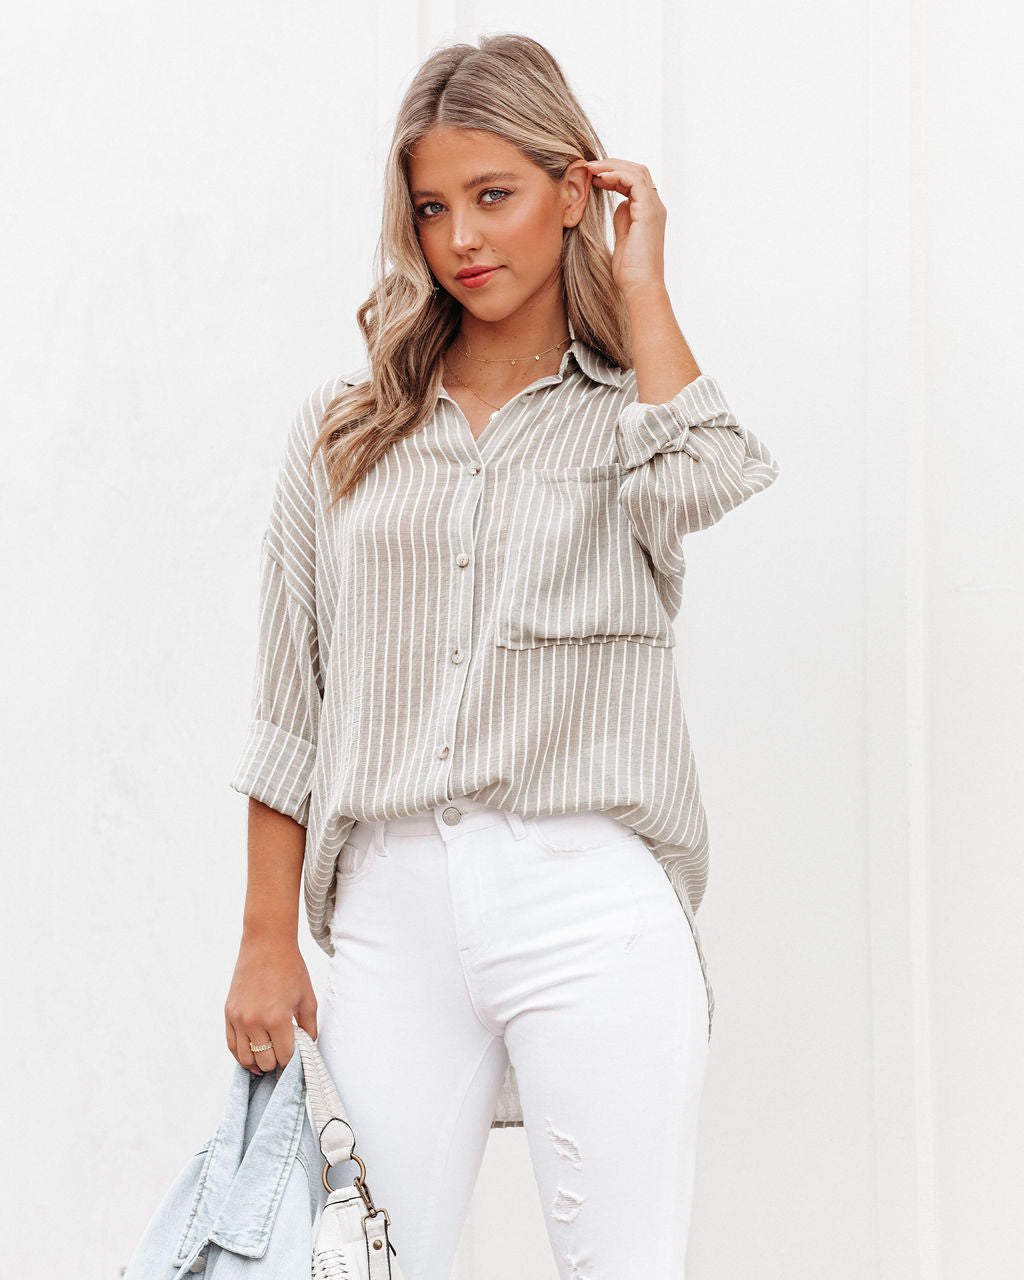 Leonce Striped Button Down Top - Taupe